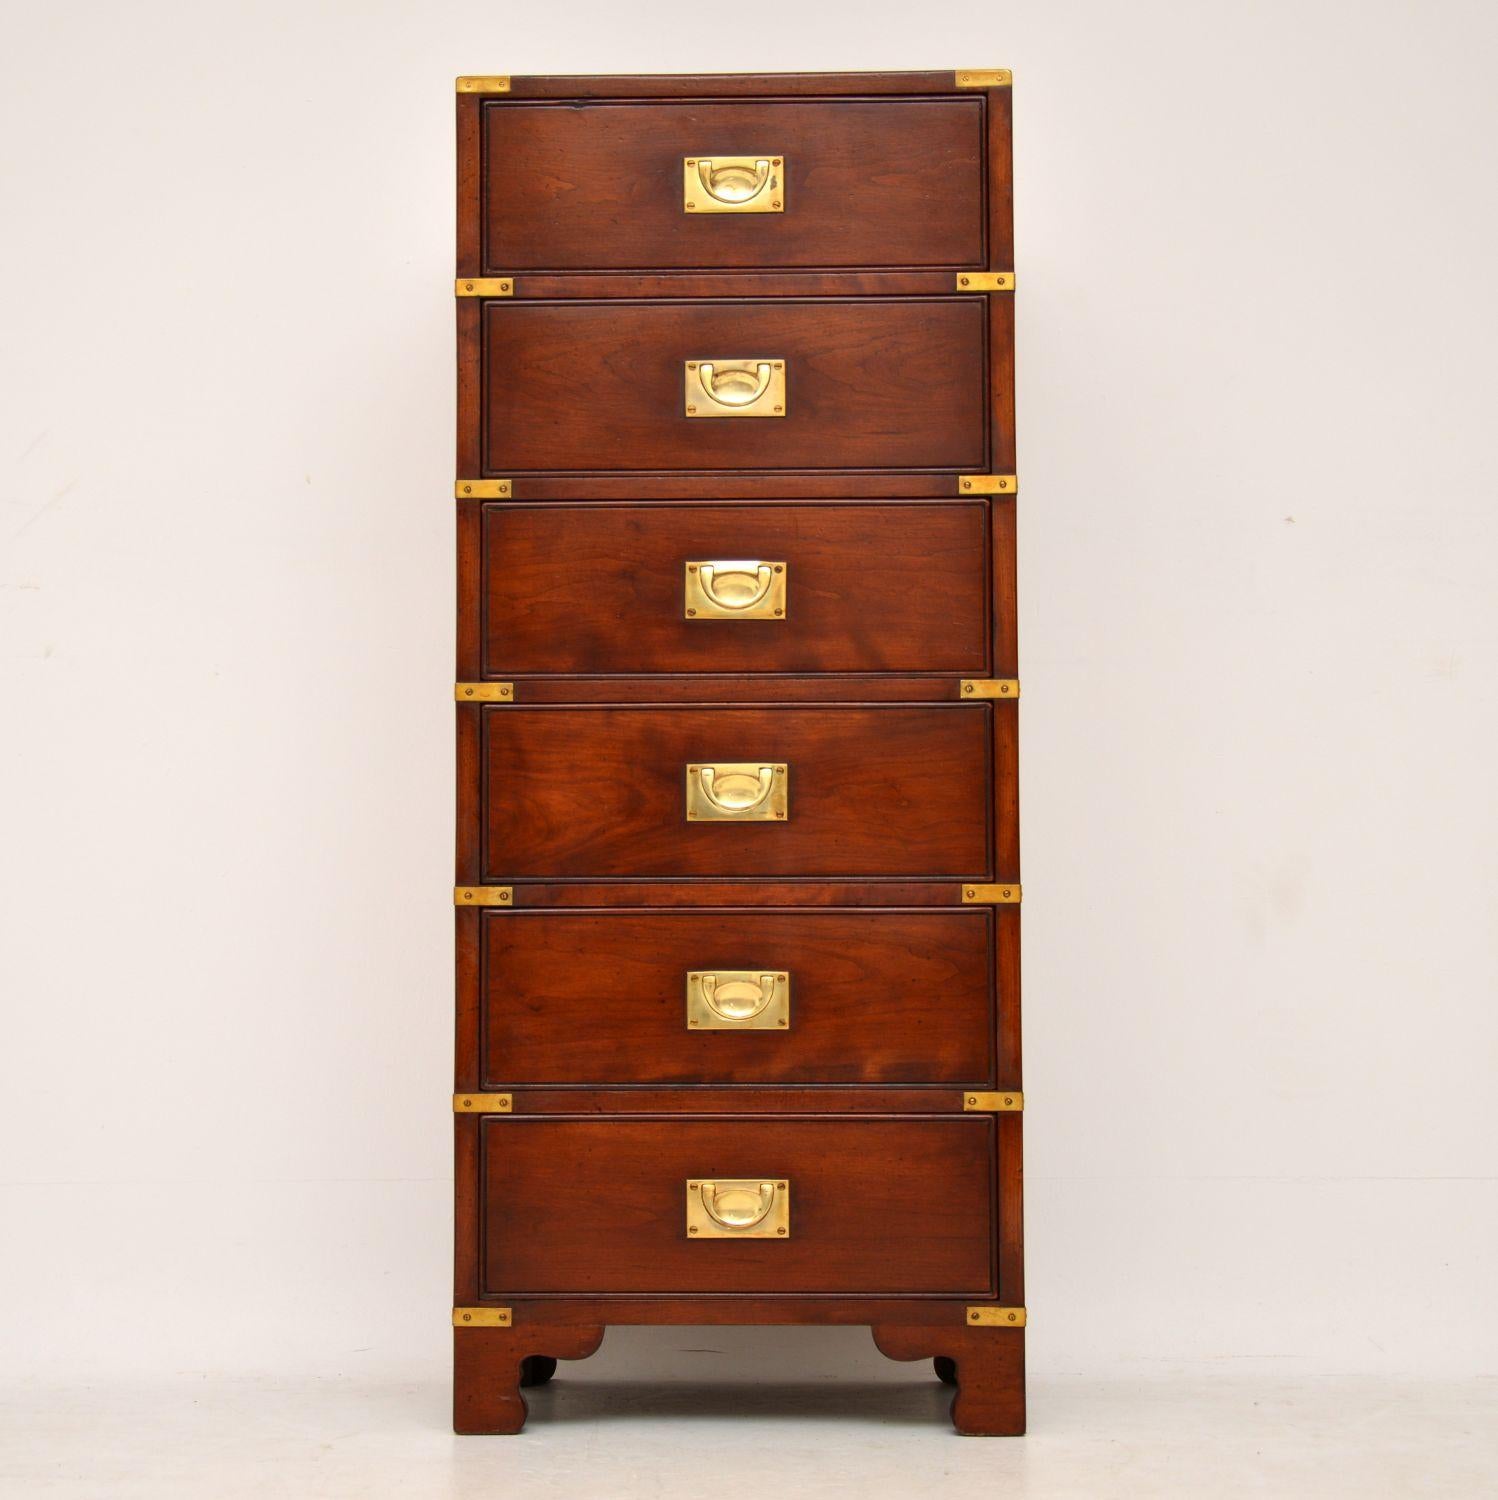 Antique military Campaign style mahogany chest of drawers with lovely slim proportions and in excellent condition having just been polished. The mahogany has a nice patination and a rich color. There are six drawers all with sunken military brass